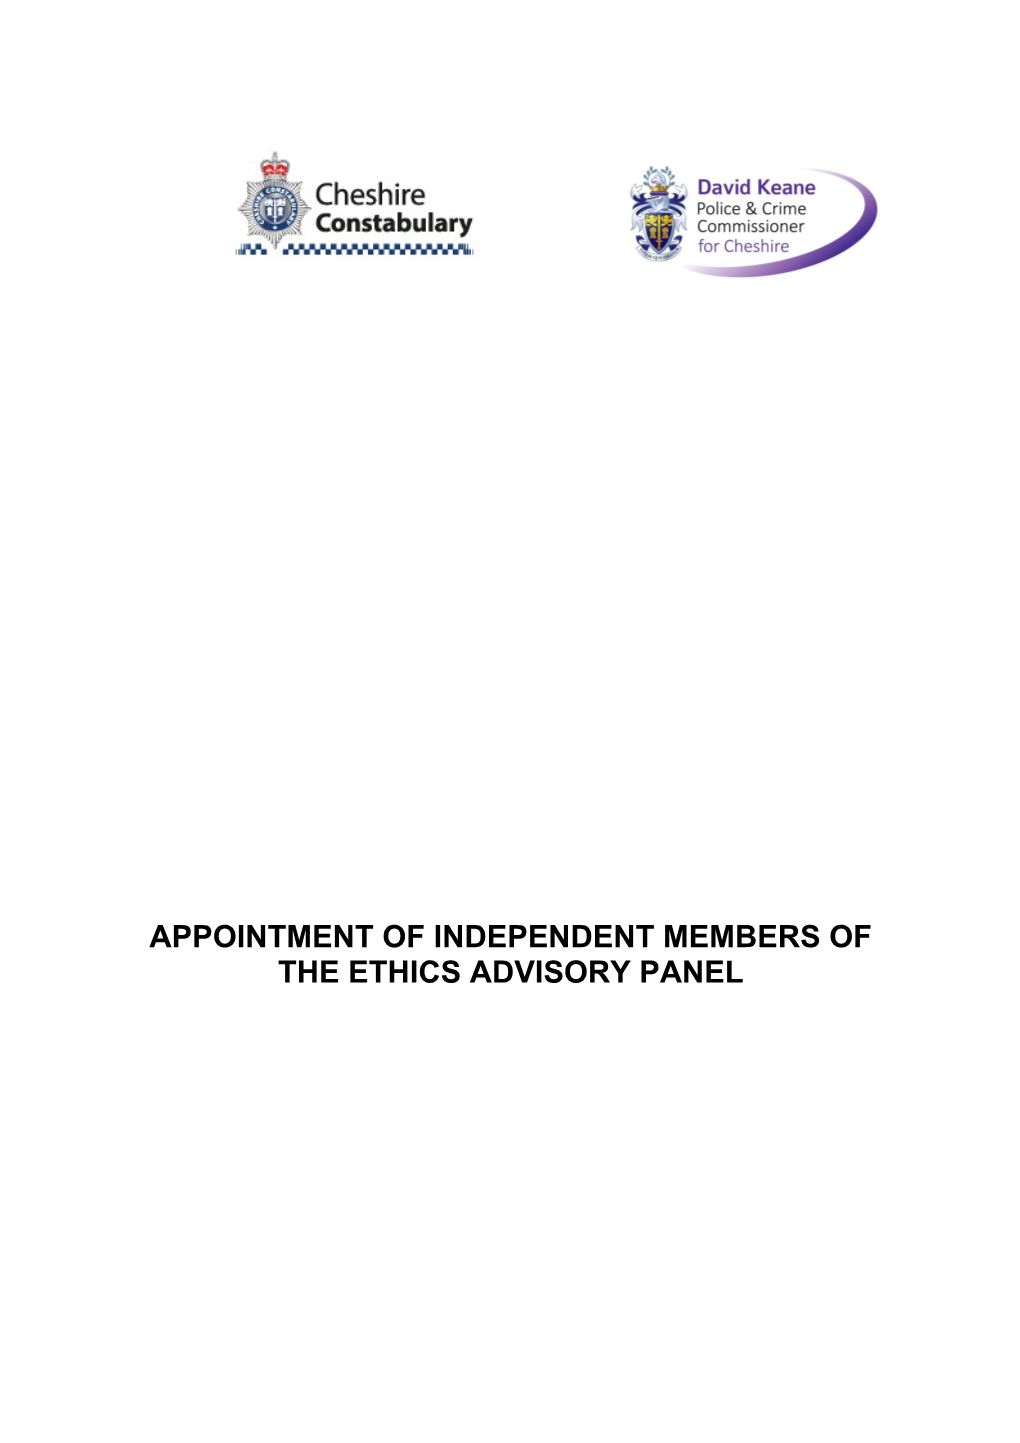 Appointment of Independent Members of the Ethics Advisory Panel